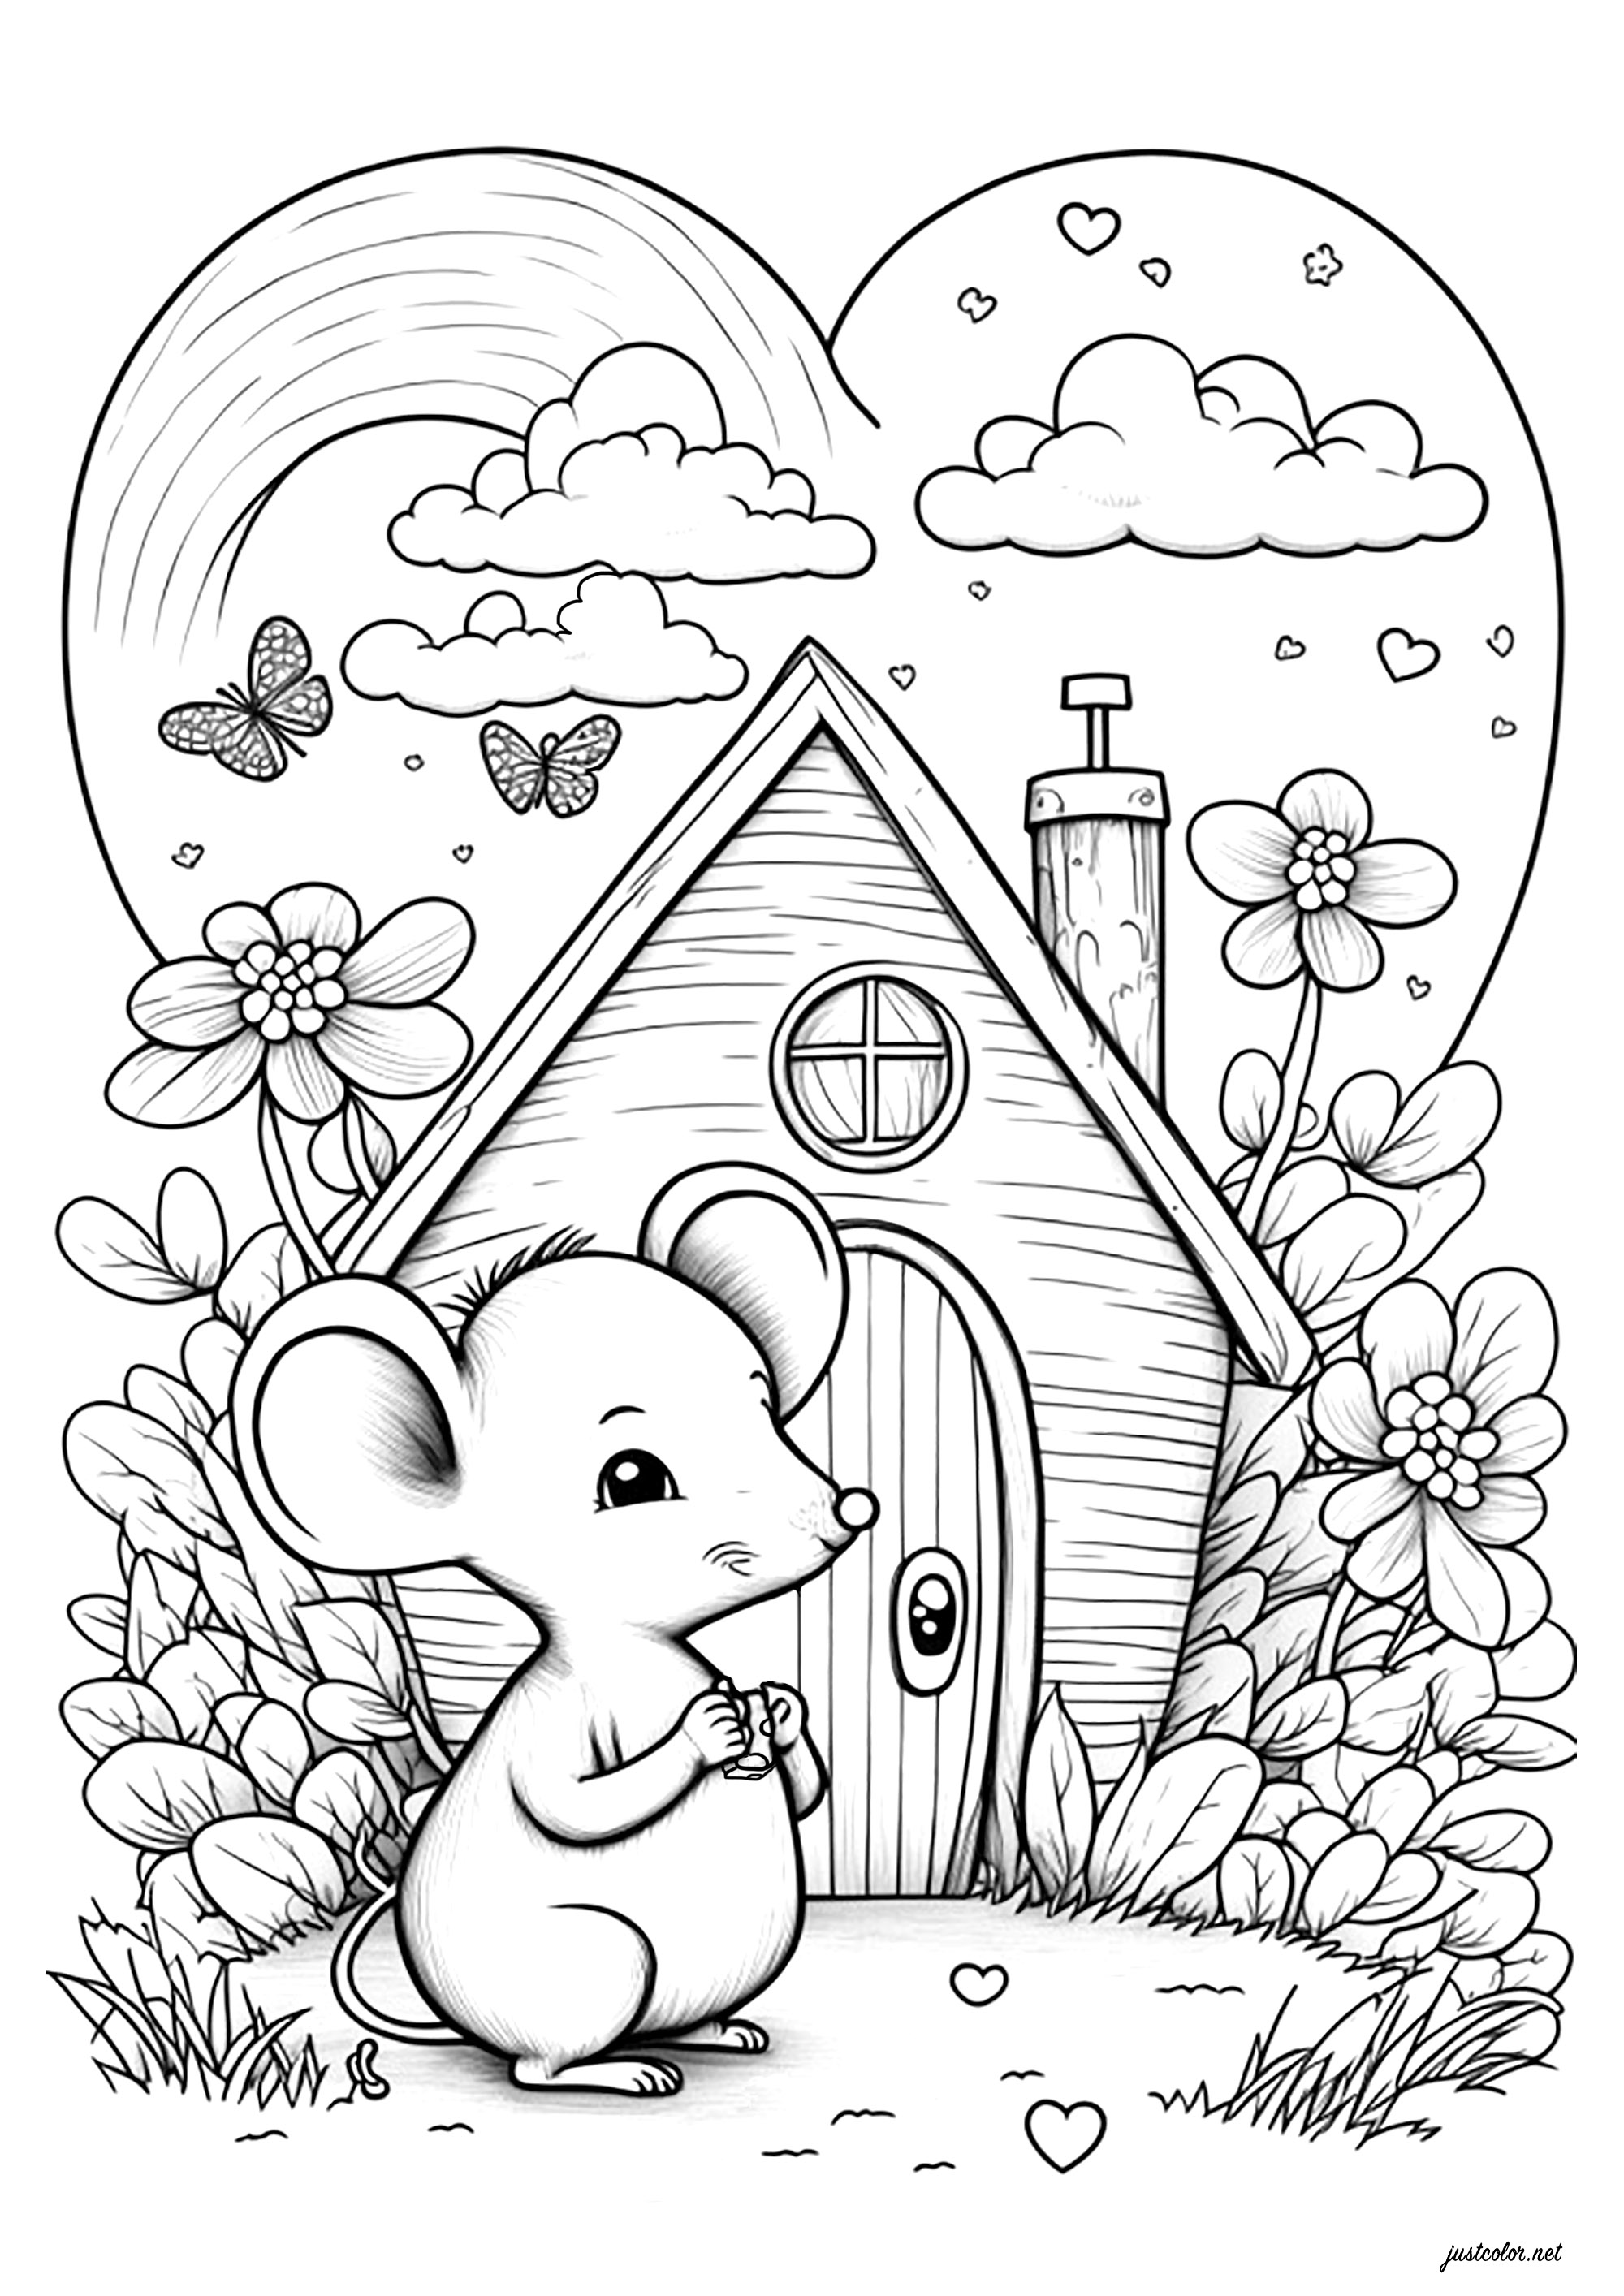 Mouse eating a piece of cheese in front of his pretty house. This pretty mouse seems to be enjoying a moment of peace and quiet in front of his little house. Color every detail of the house, the flowery garden, the sky full of hearts and butterflies, and the cute mouse... your creativity has no limits!